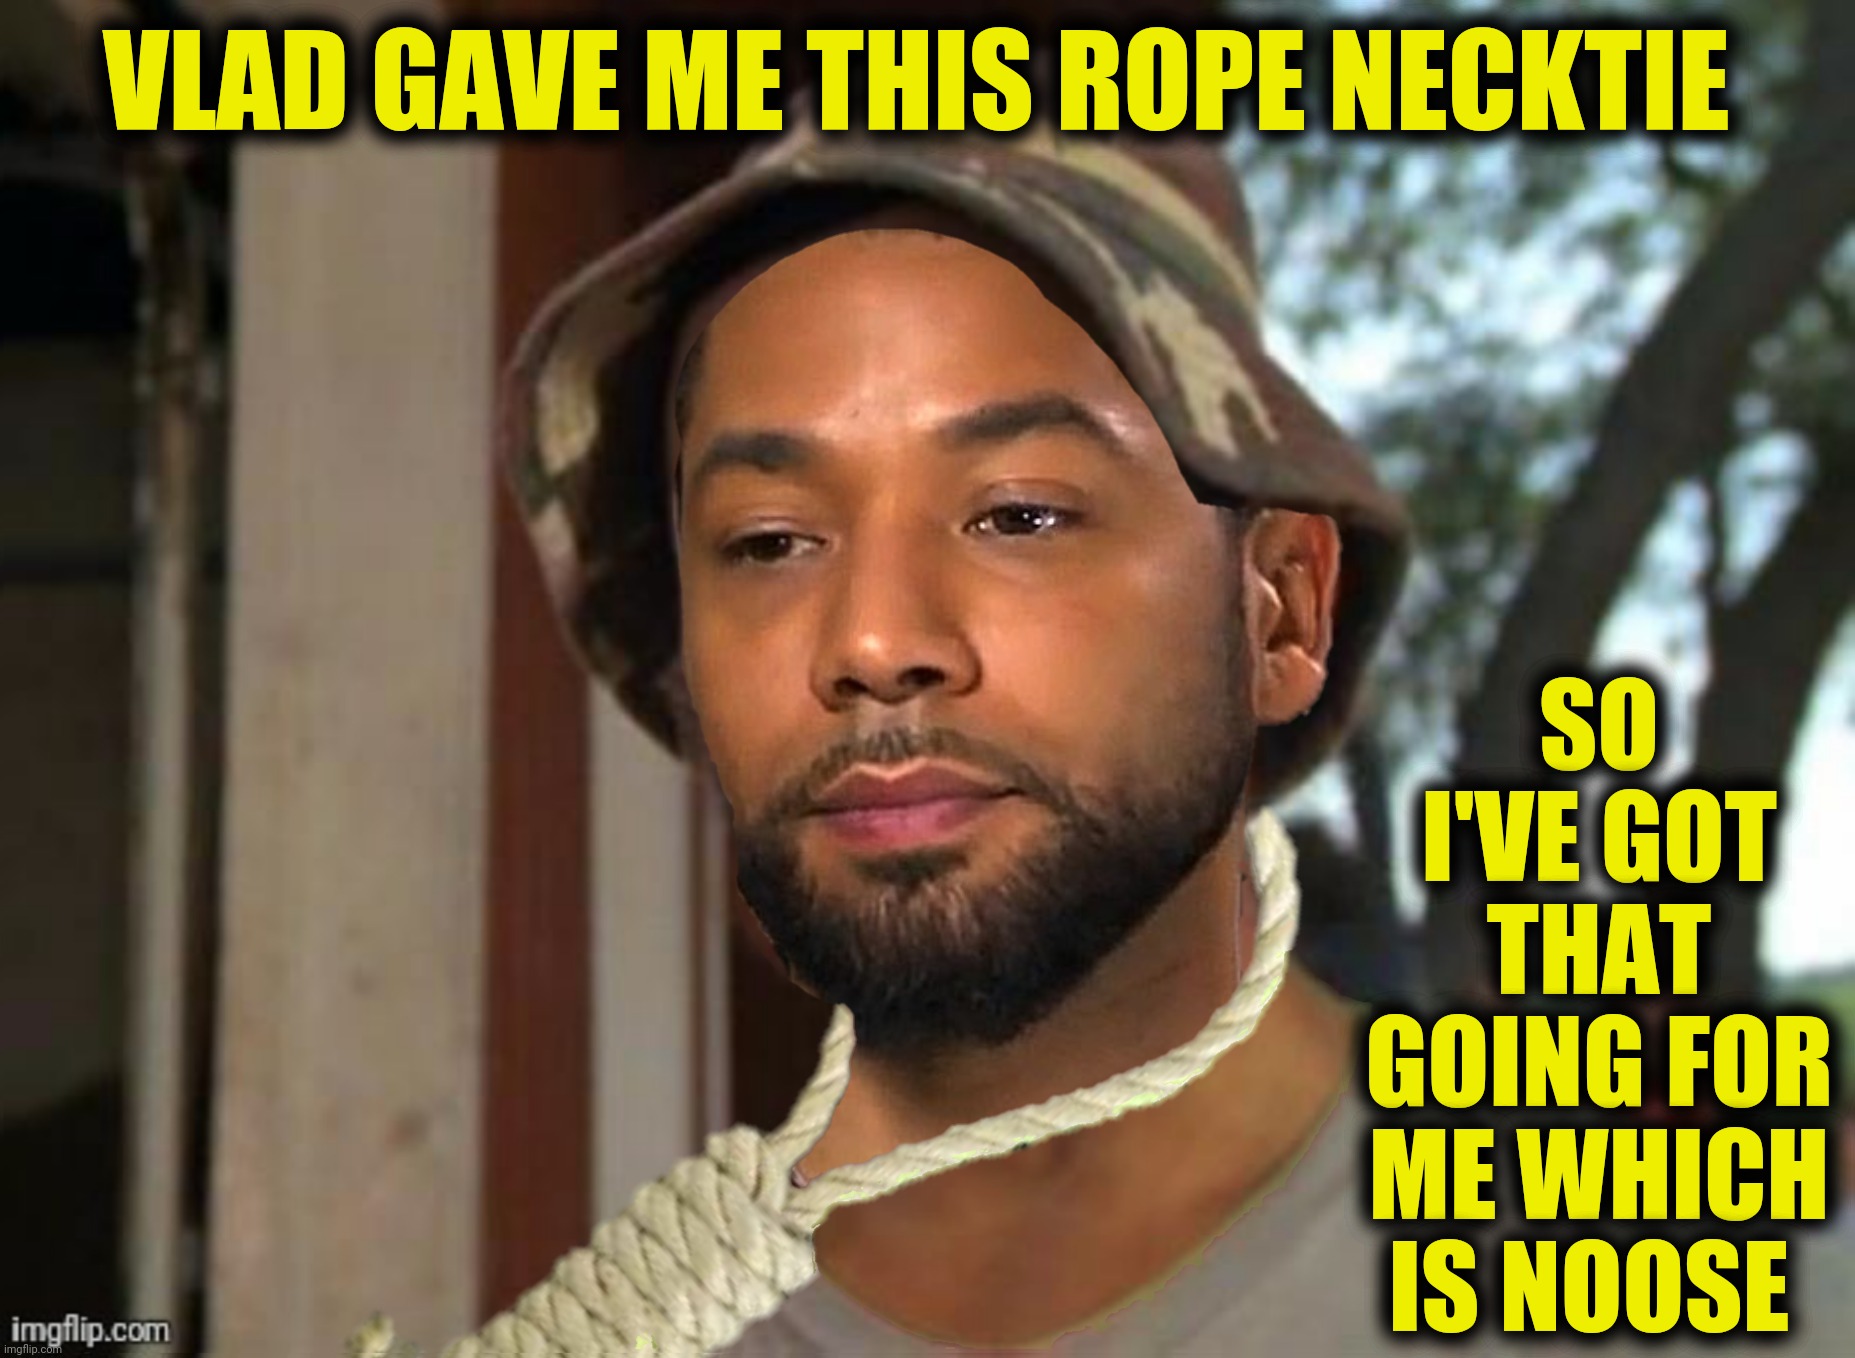 VLAD GAVE ME THIS ROPE NECKTIE SO I'VE GOT THAT GOING FOR ME WHICH IS NOOSE | made w/ Imgflip meme maker